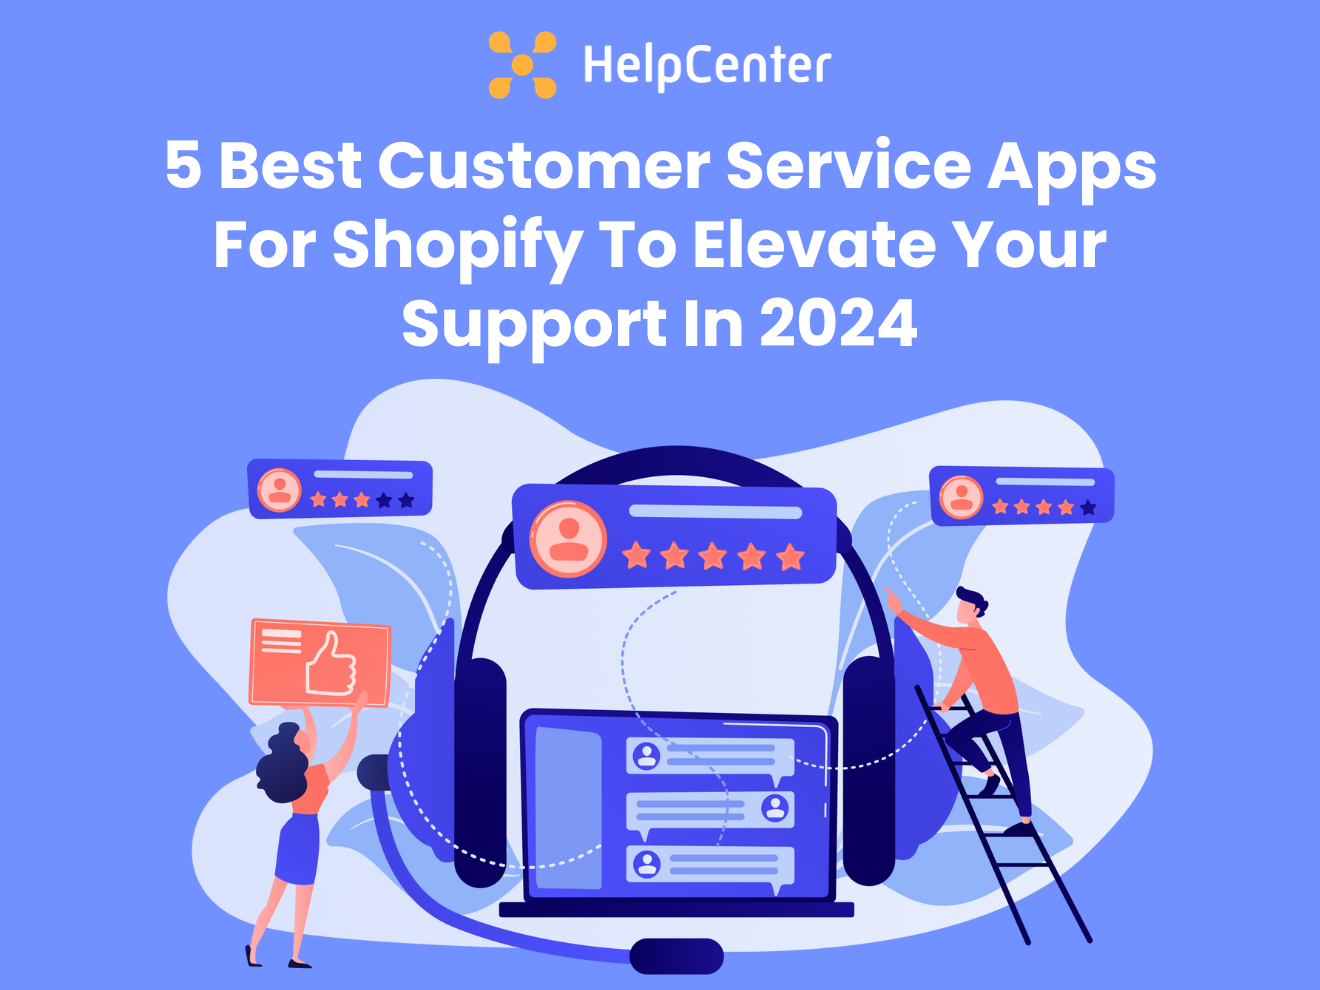 5 Best Customer Service Apps For Shopify To Elevate Your Support In 2024